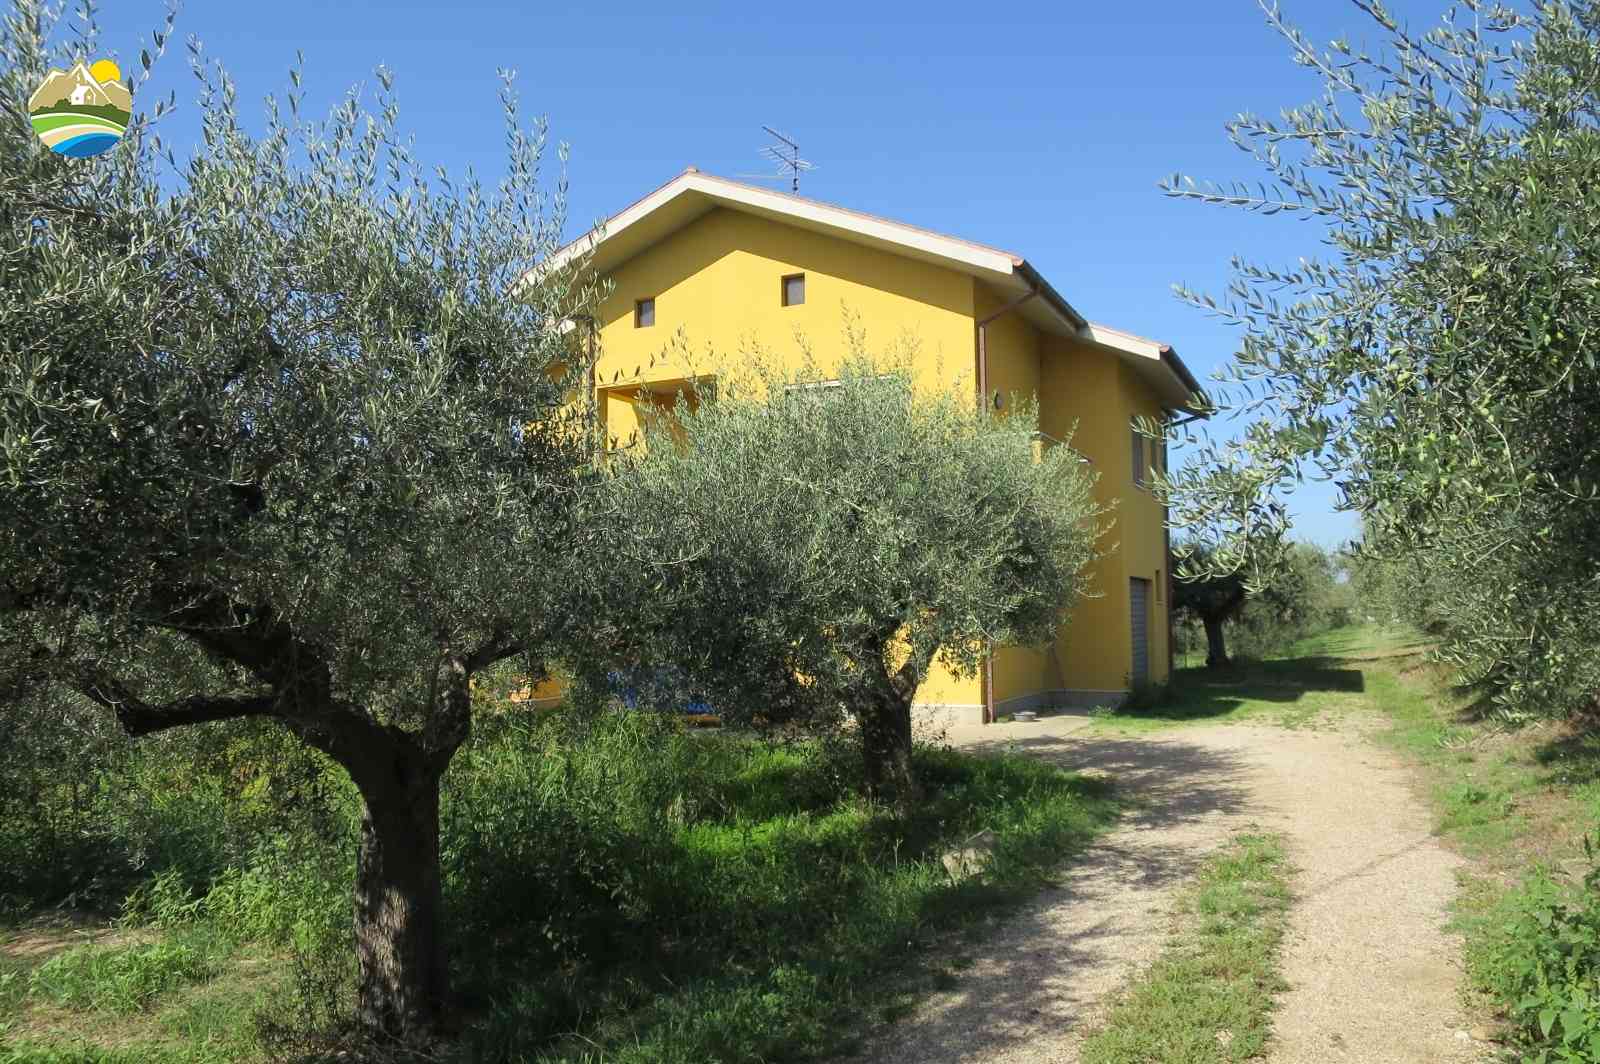 Country Houses Country Houses for sale Elice (PE), Casa del Sole - Elice - EUR 282.245 10